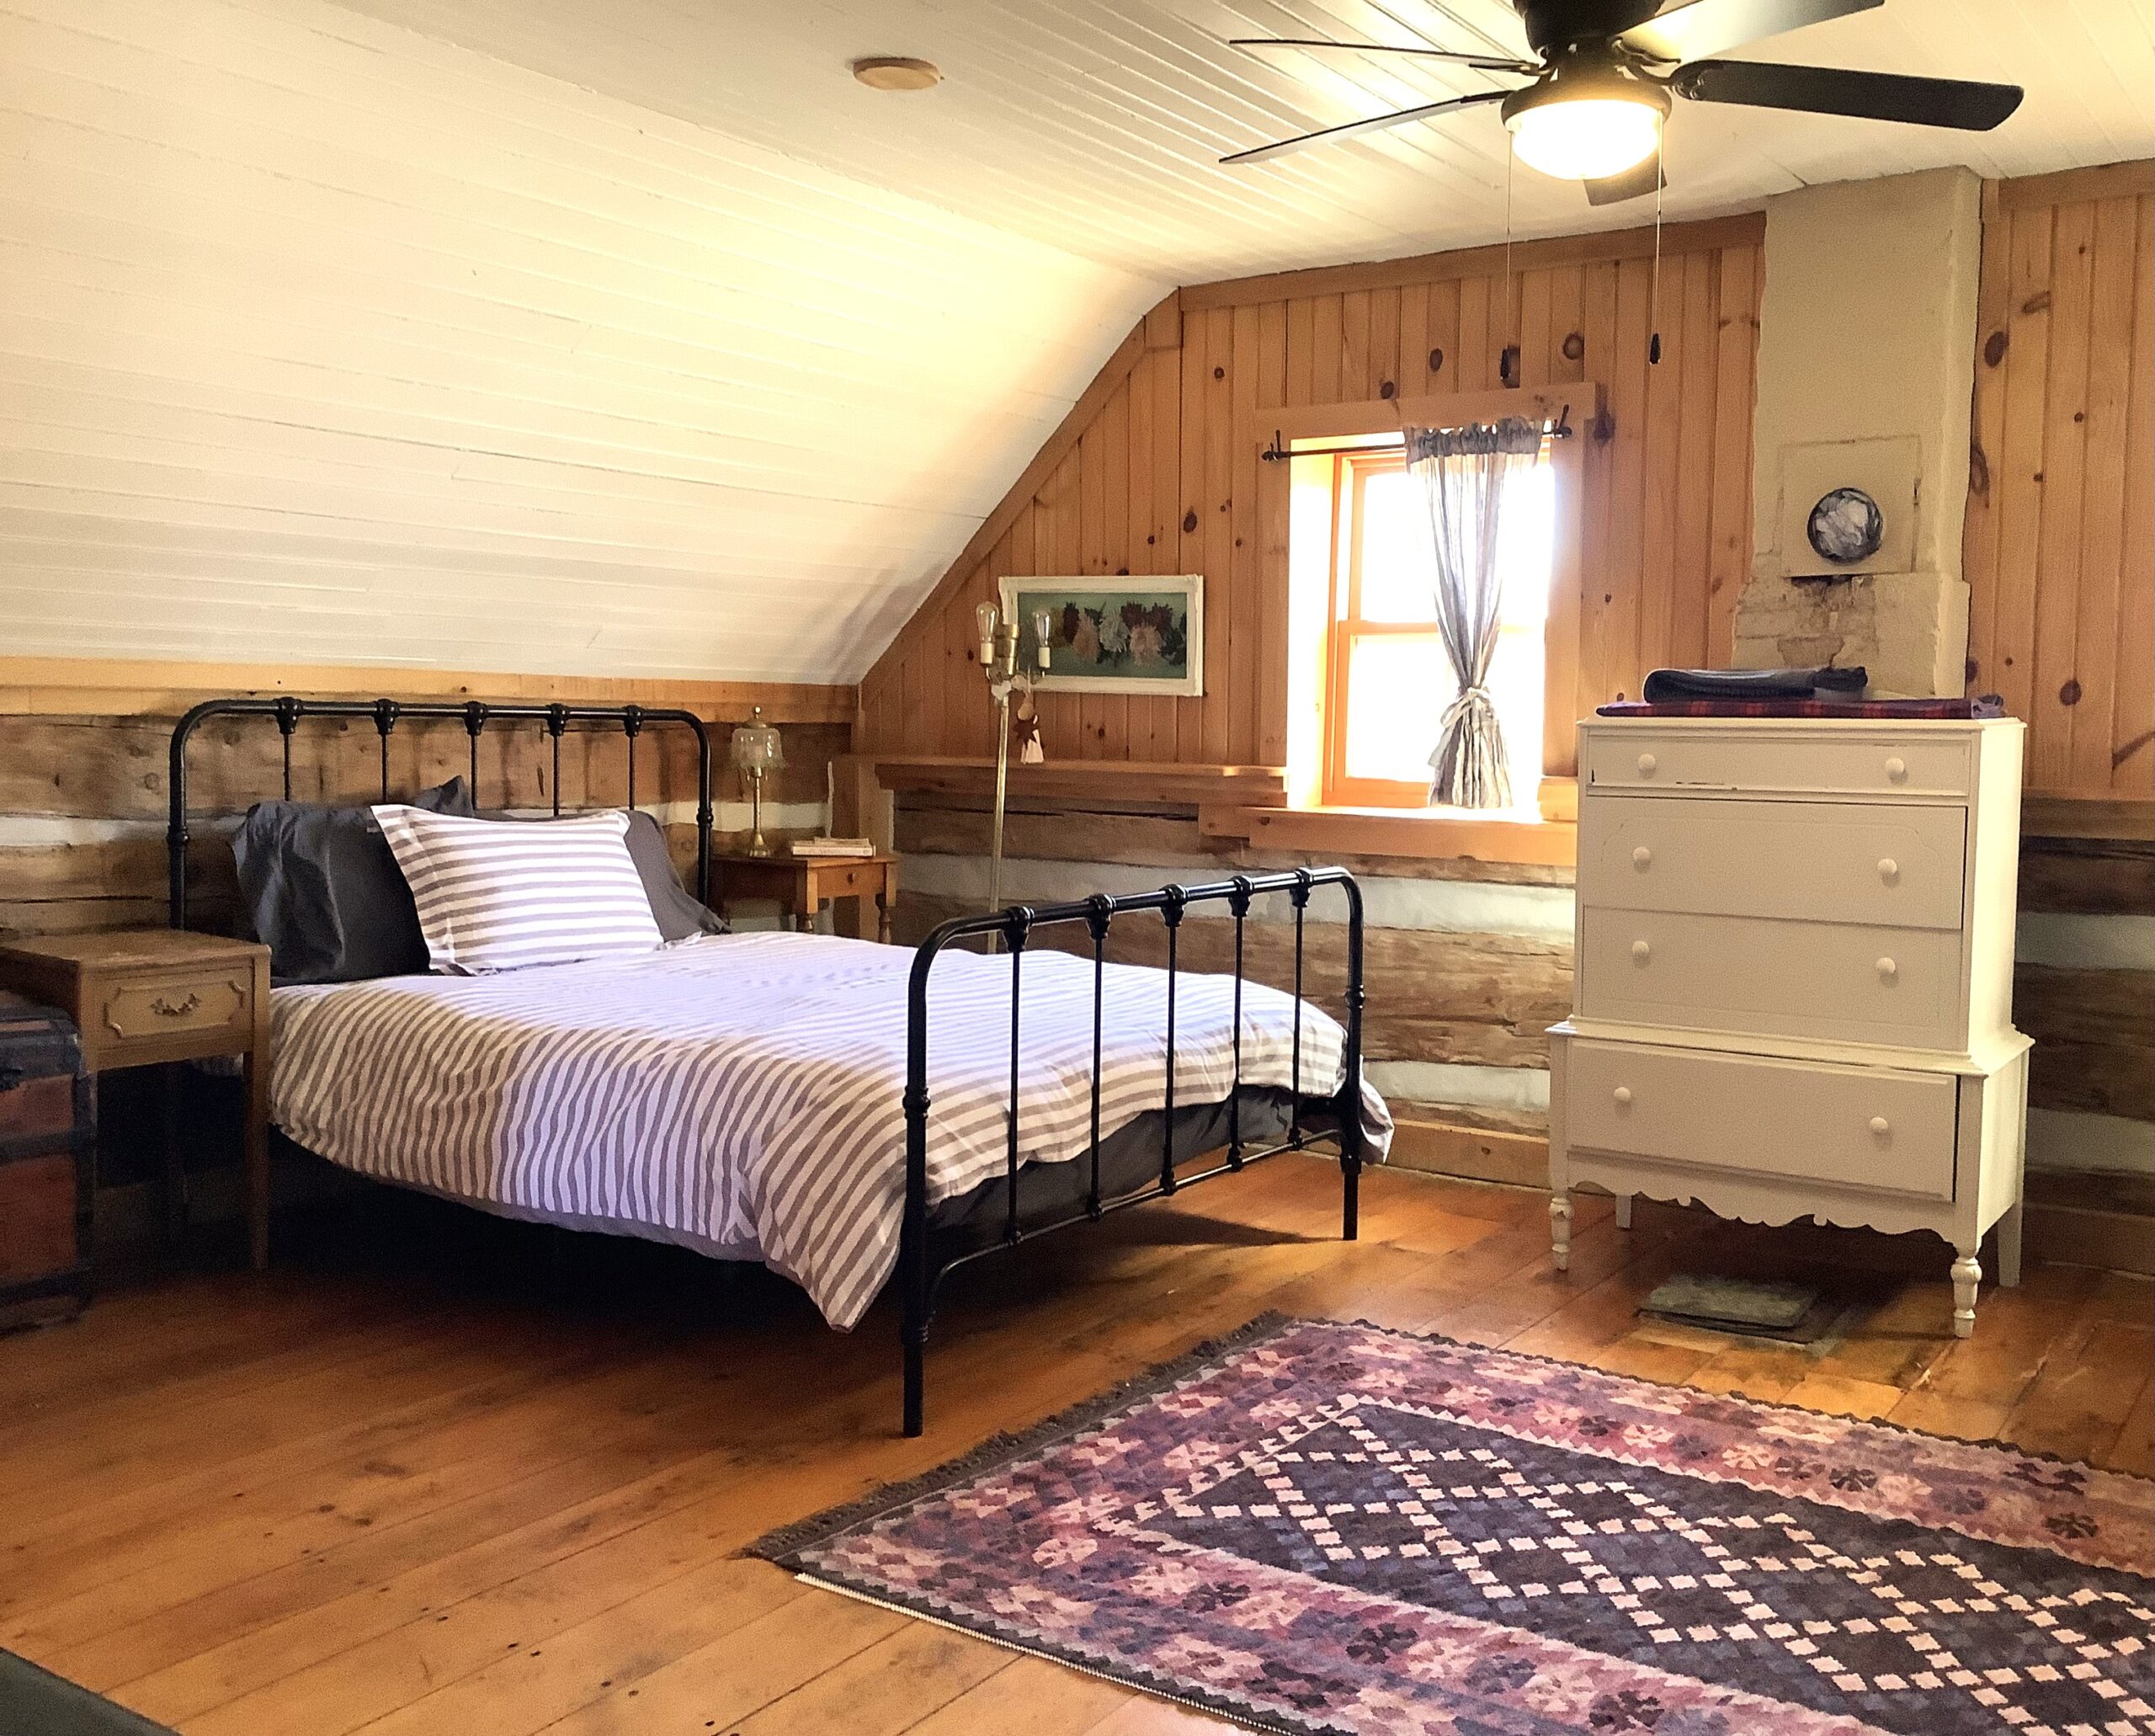 A big bedroom with angled walls, a big bed, a white dresser, a ceiling fan, and an ornate rug over hardwood flooring.